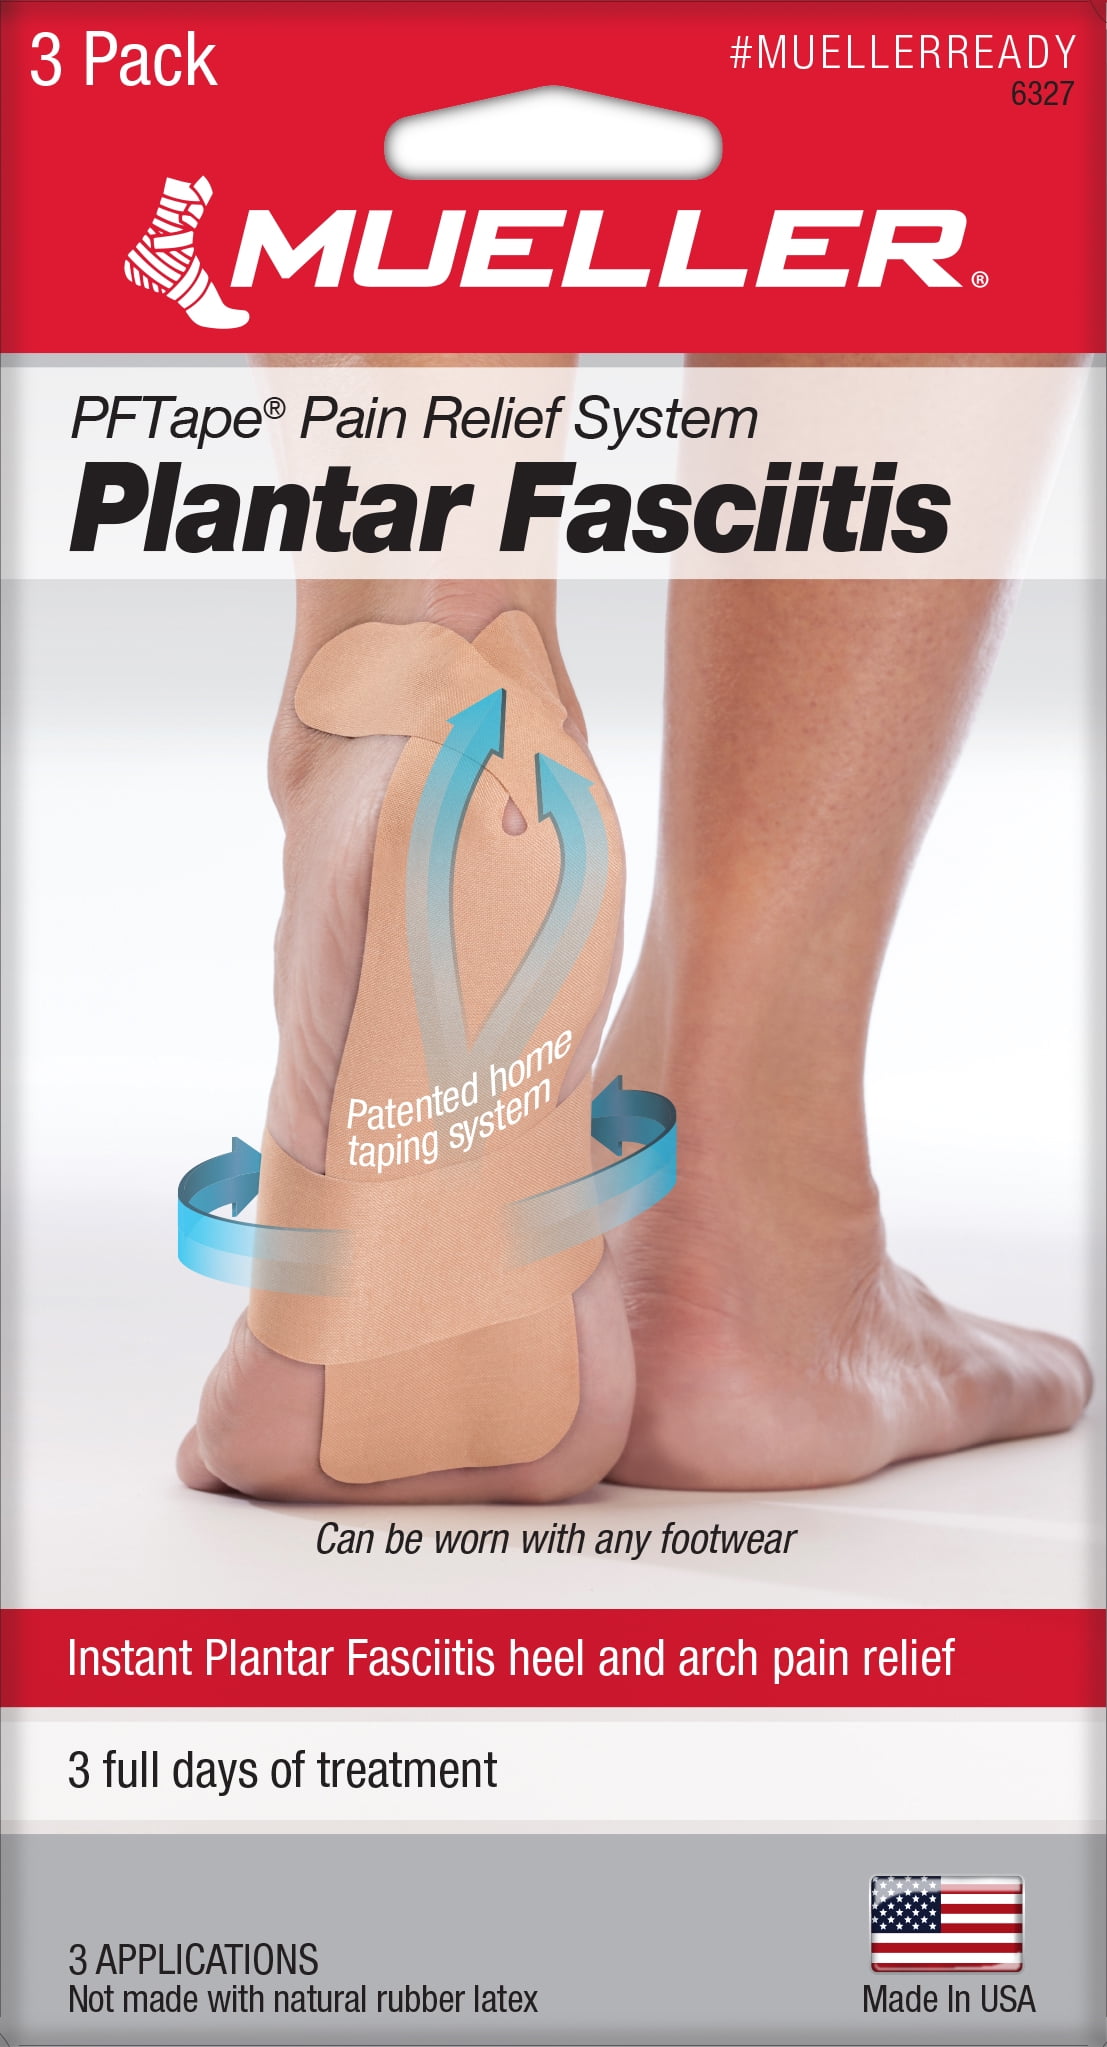 tape for planters fasciitis